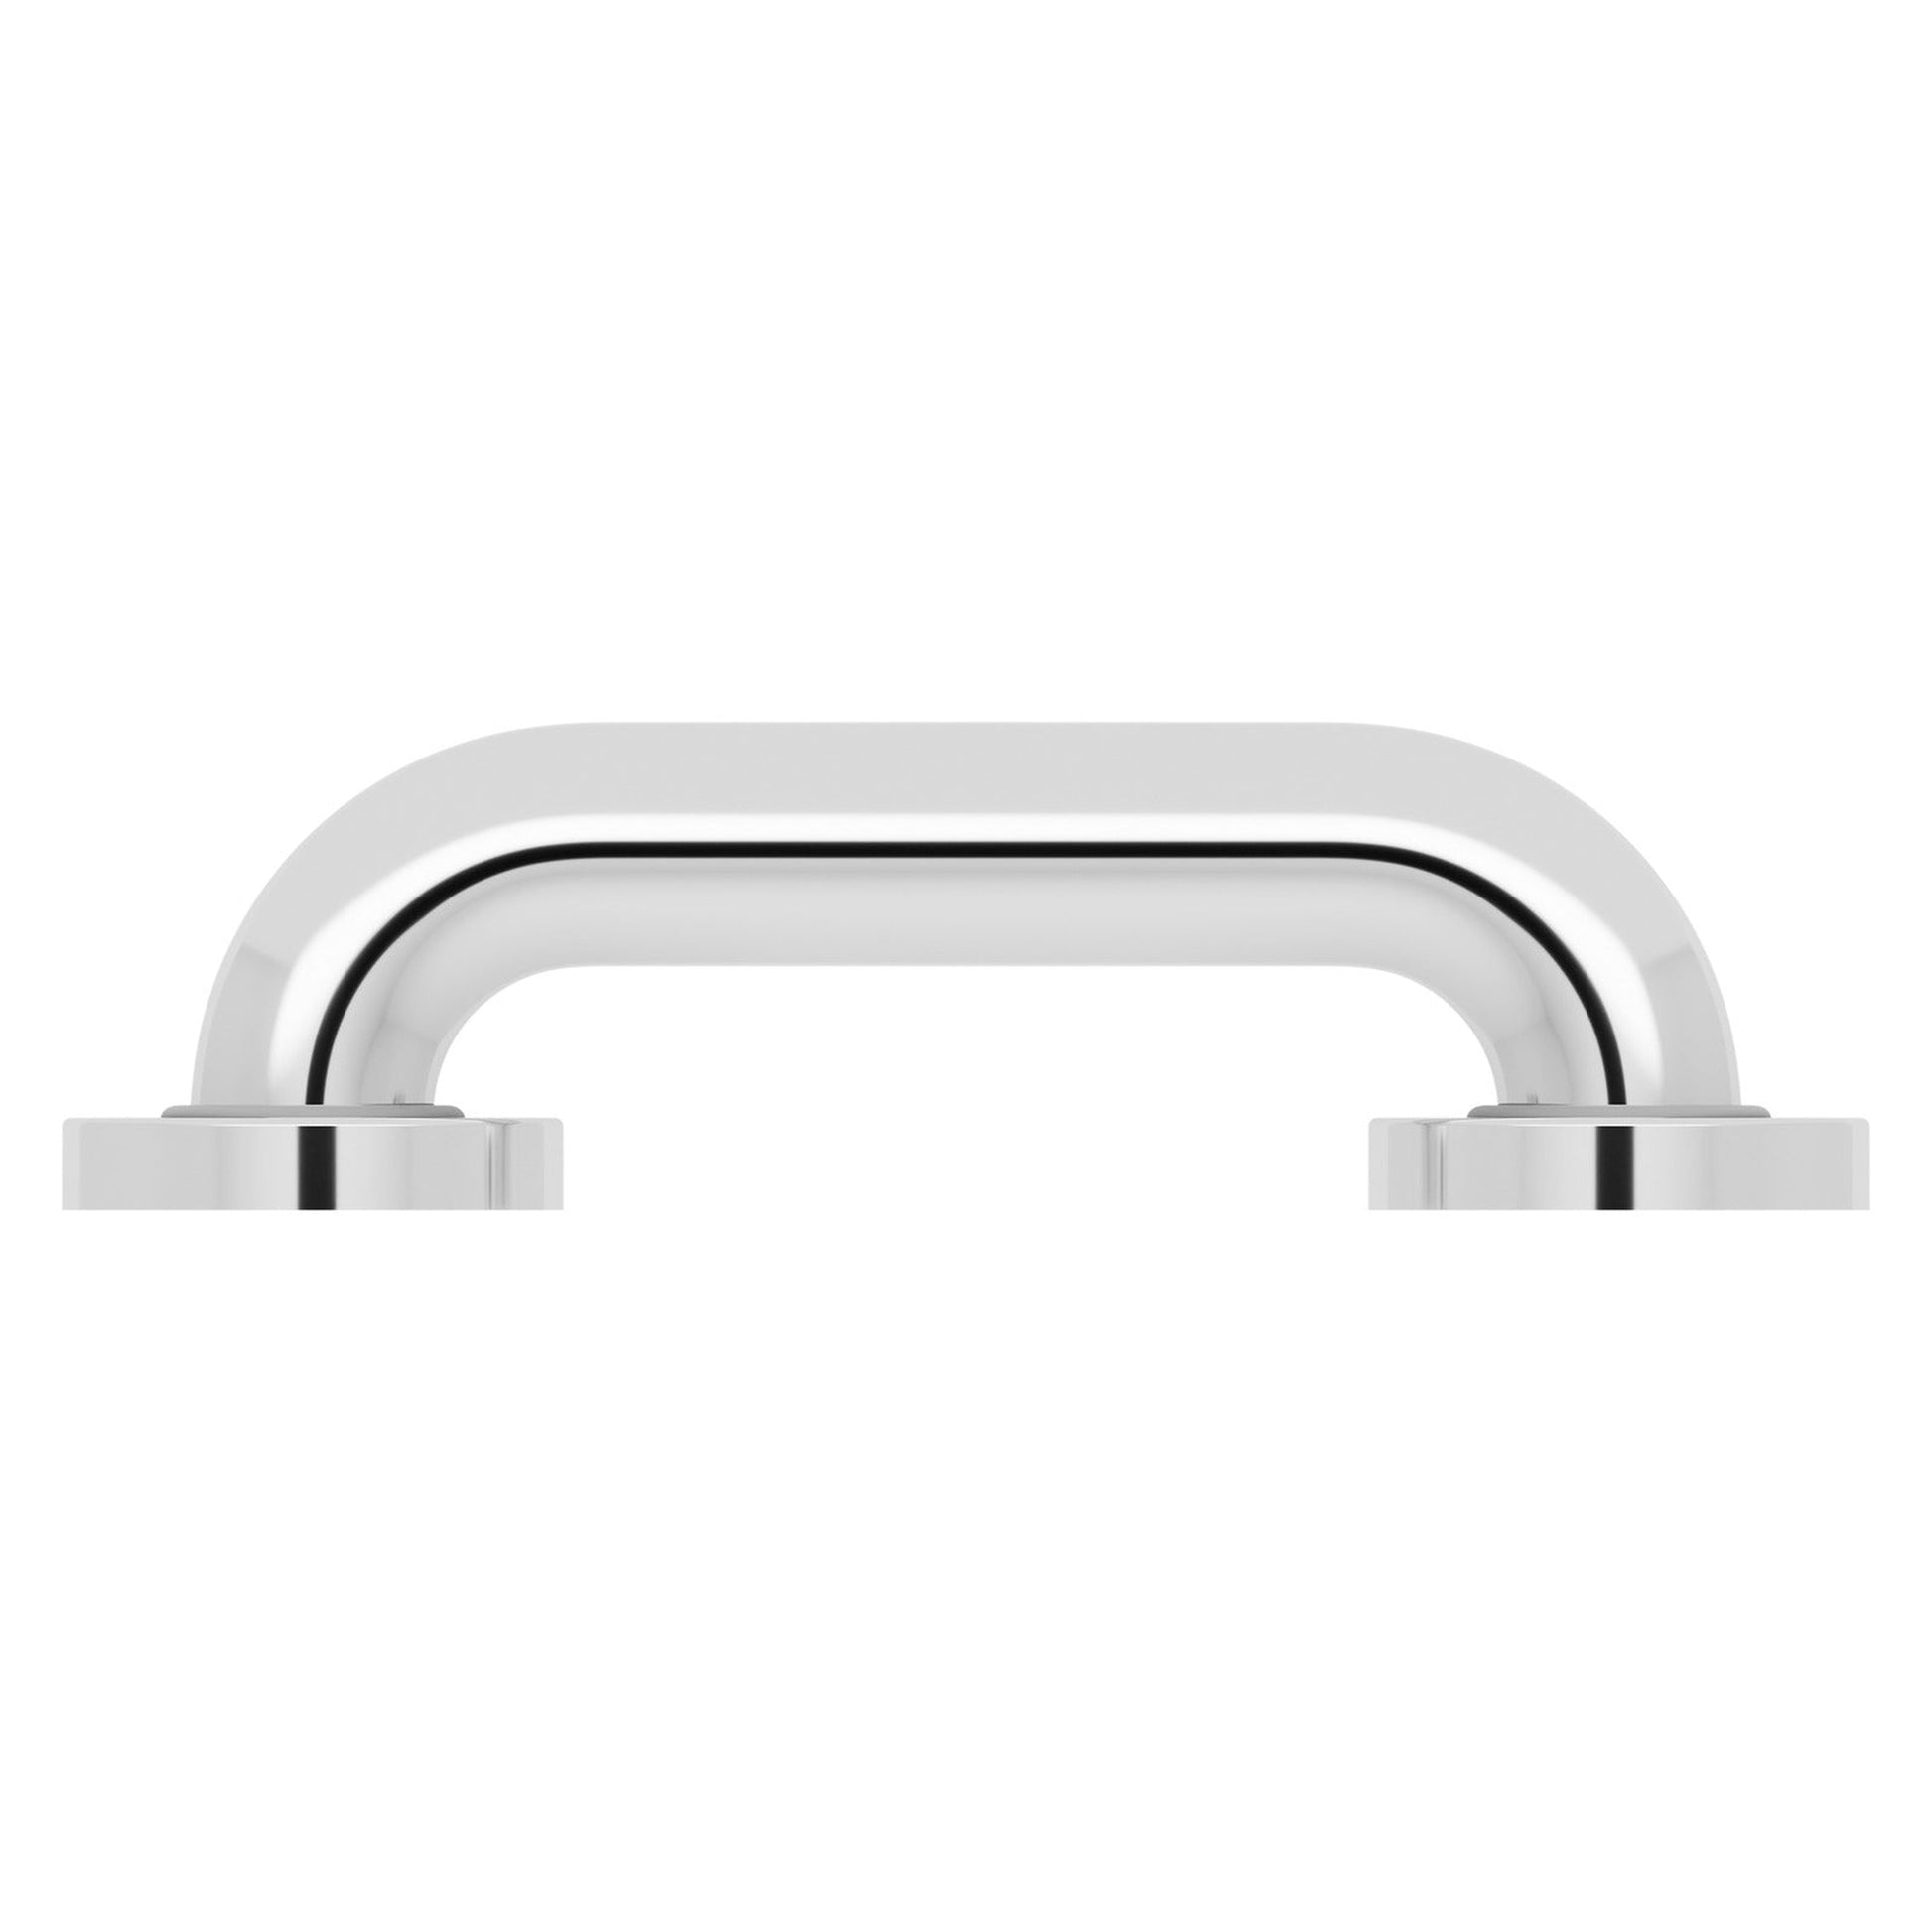 Evekare 8" x 1.5" Polished Stainless Steel Concealed Mount Grab Bar